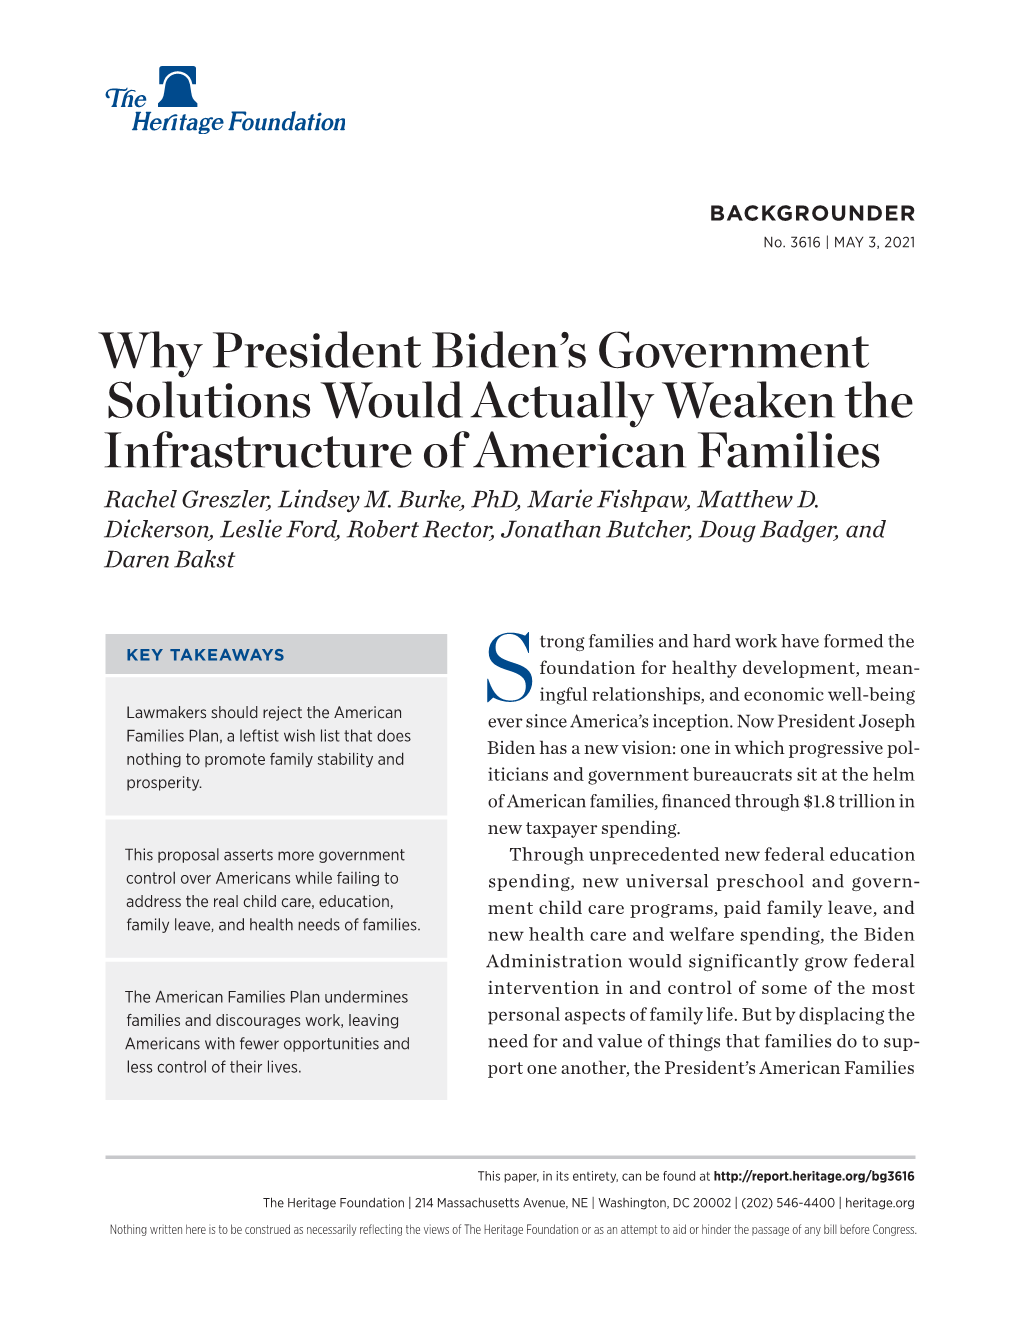 Supporting Families Means That Lawmakers Should Reject the Leftist Laundry List in the Biden Plan